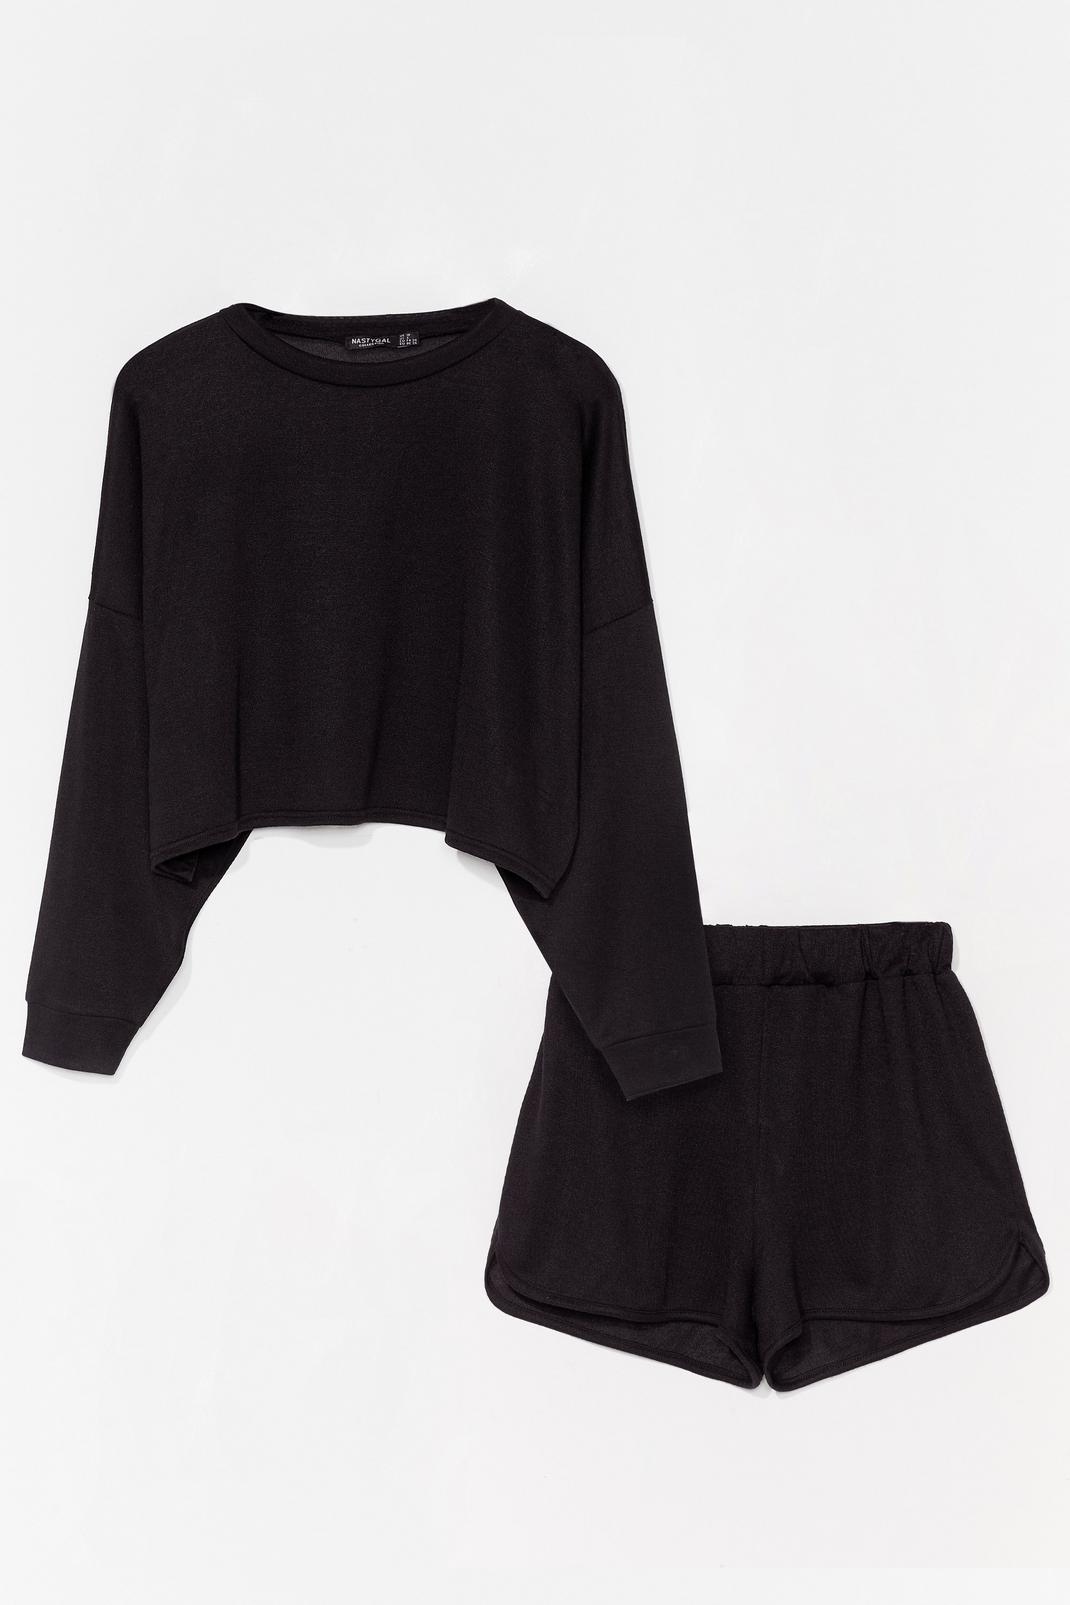 Black Batwing Sweater And Shorts Set image number 1